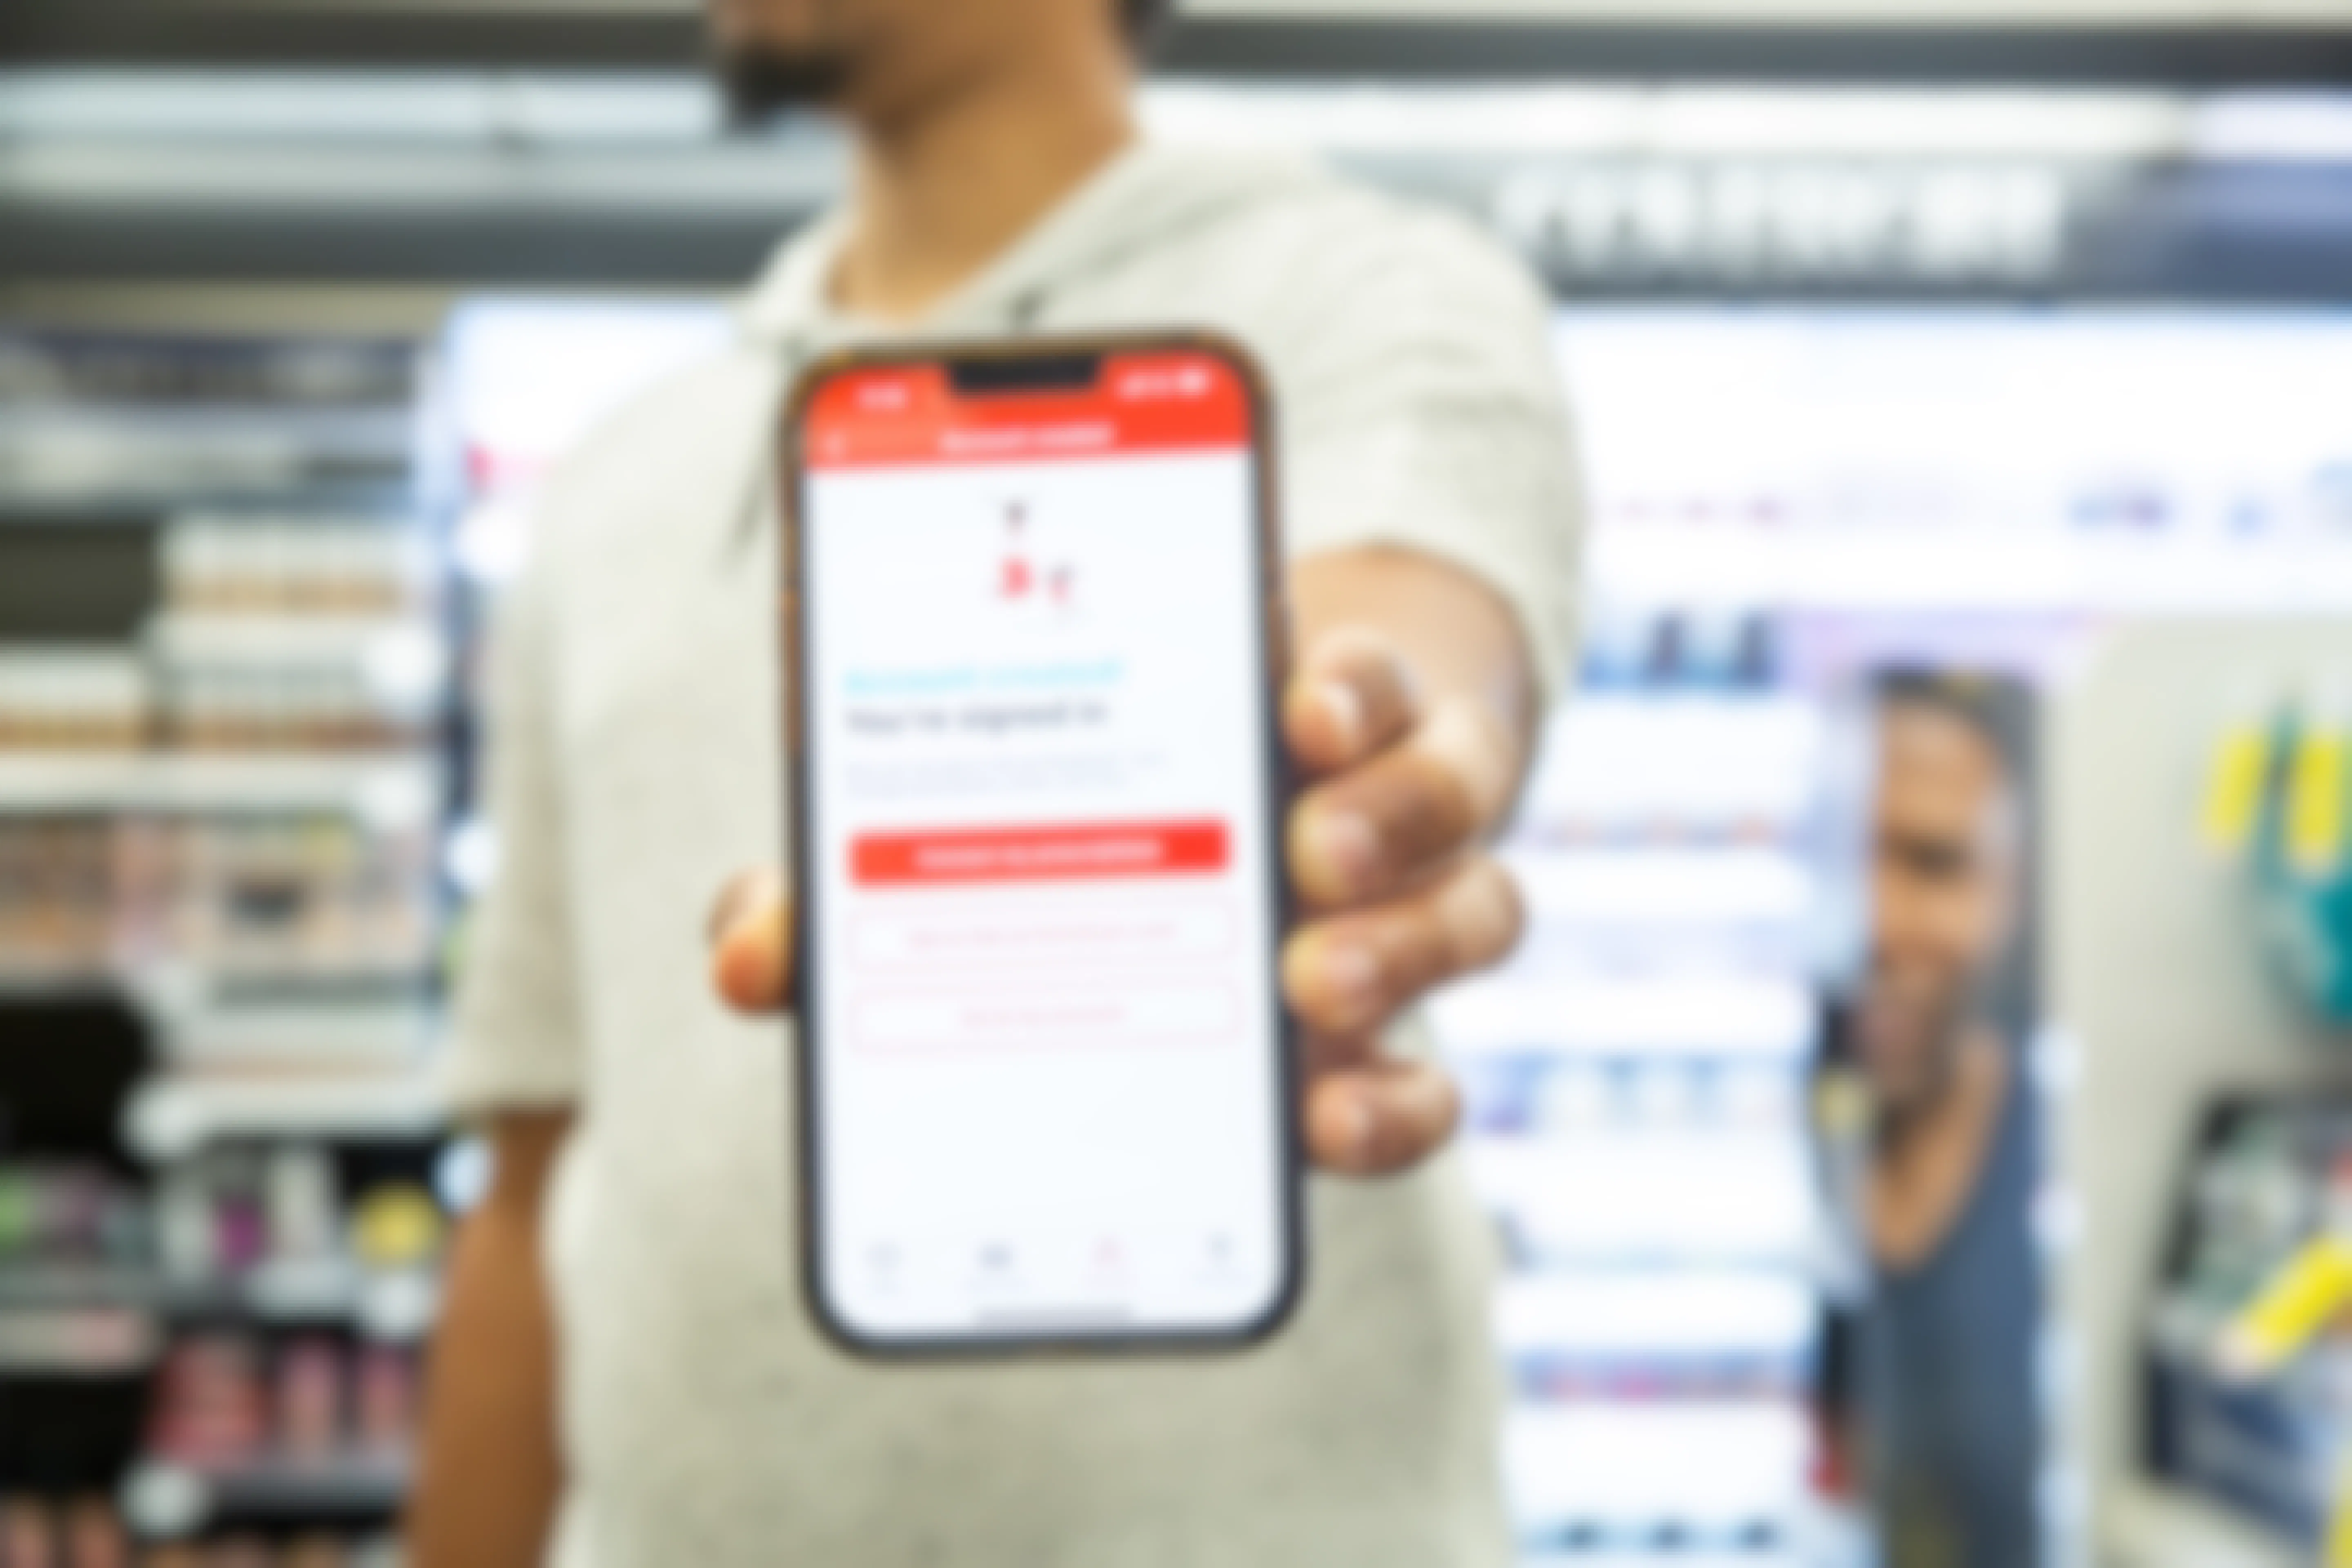 Hand holding phone that shows the CVS Pharmacy account creation page 